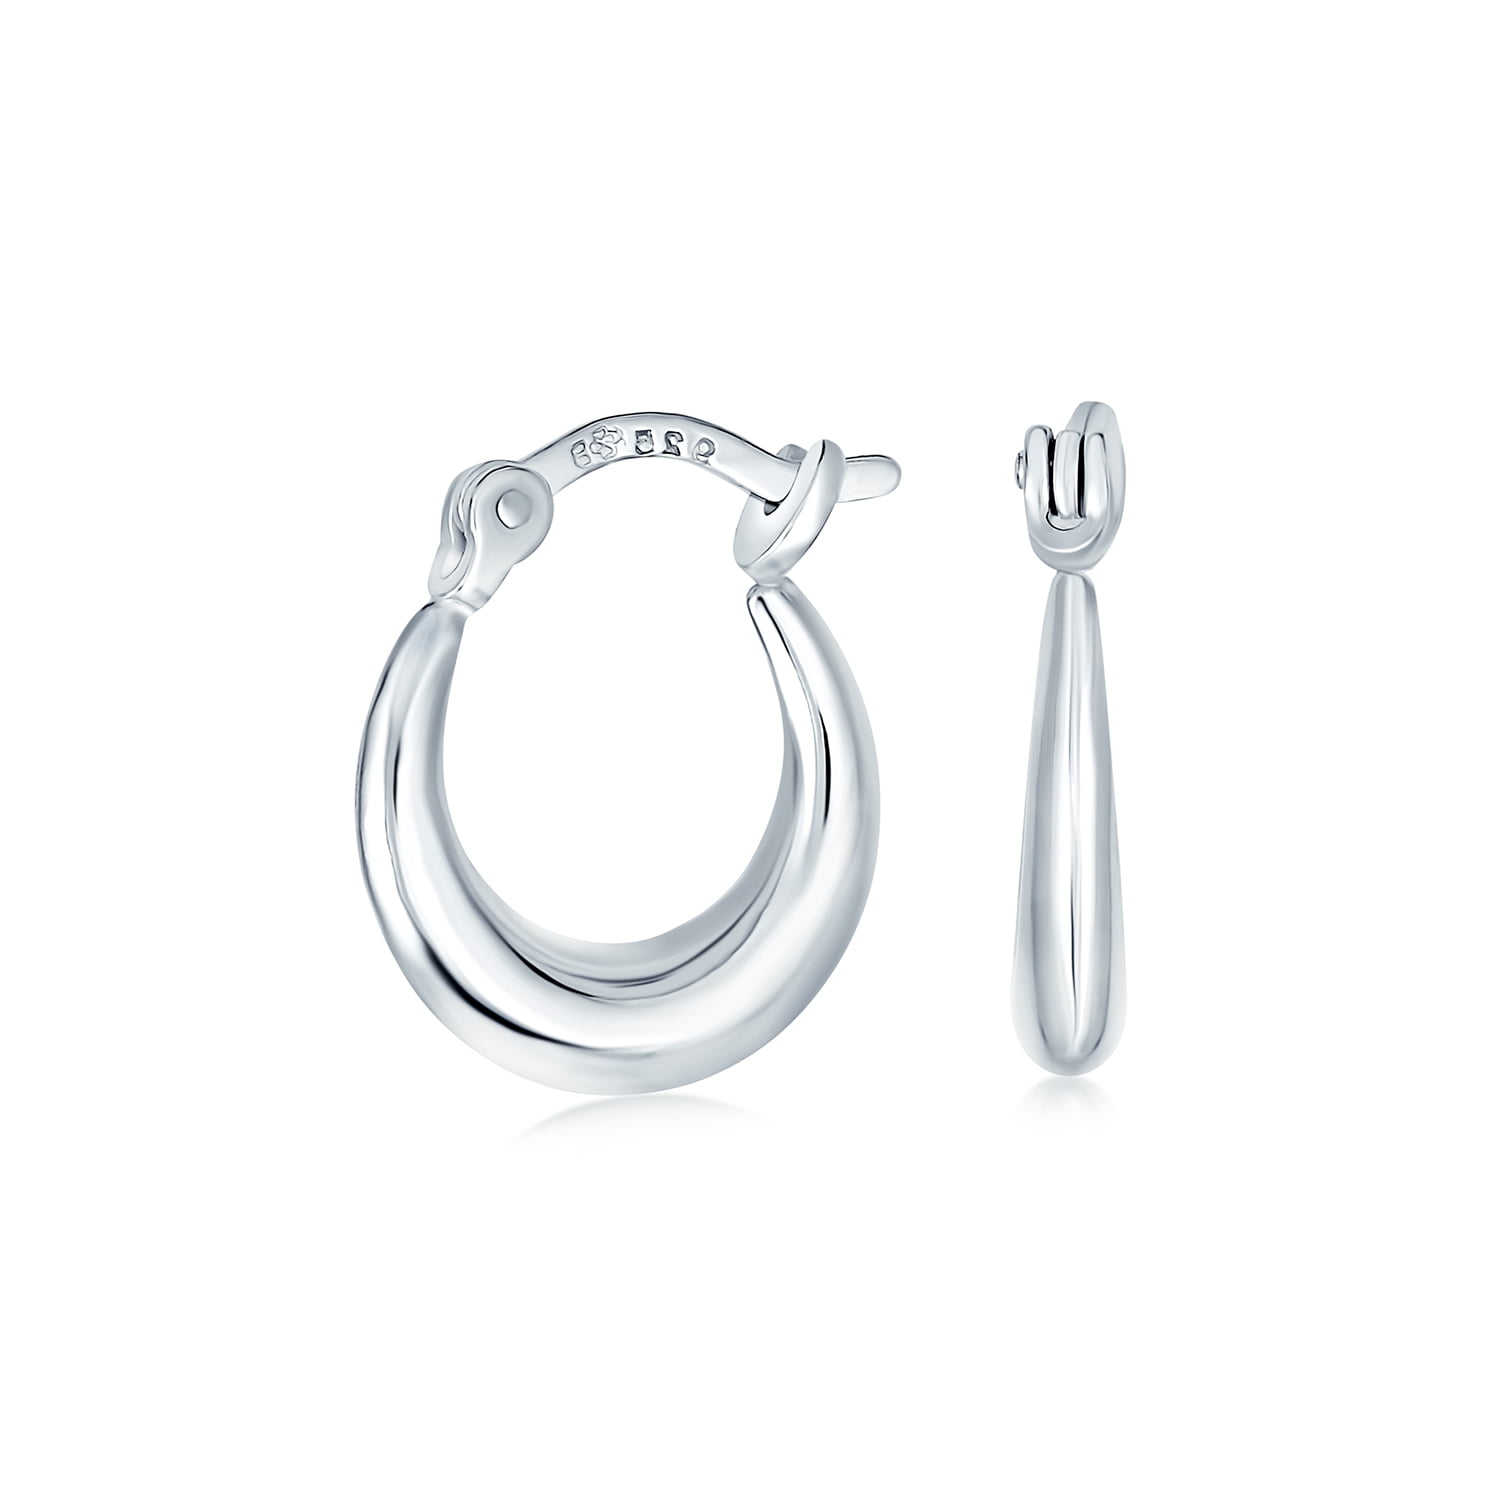 925 Sterling Silver Polished Hollow tube Hinged post 3mm Round Hoop Earrings Measures 16x14mm Wide 3mm Thick Jewelry Gifts for Women 